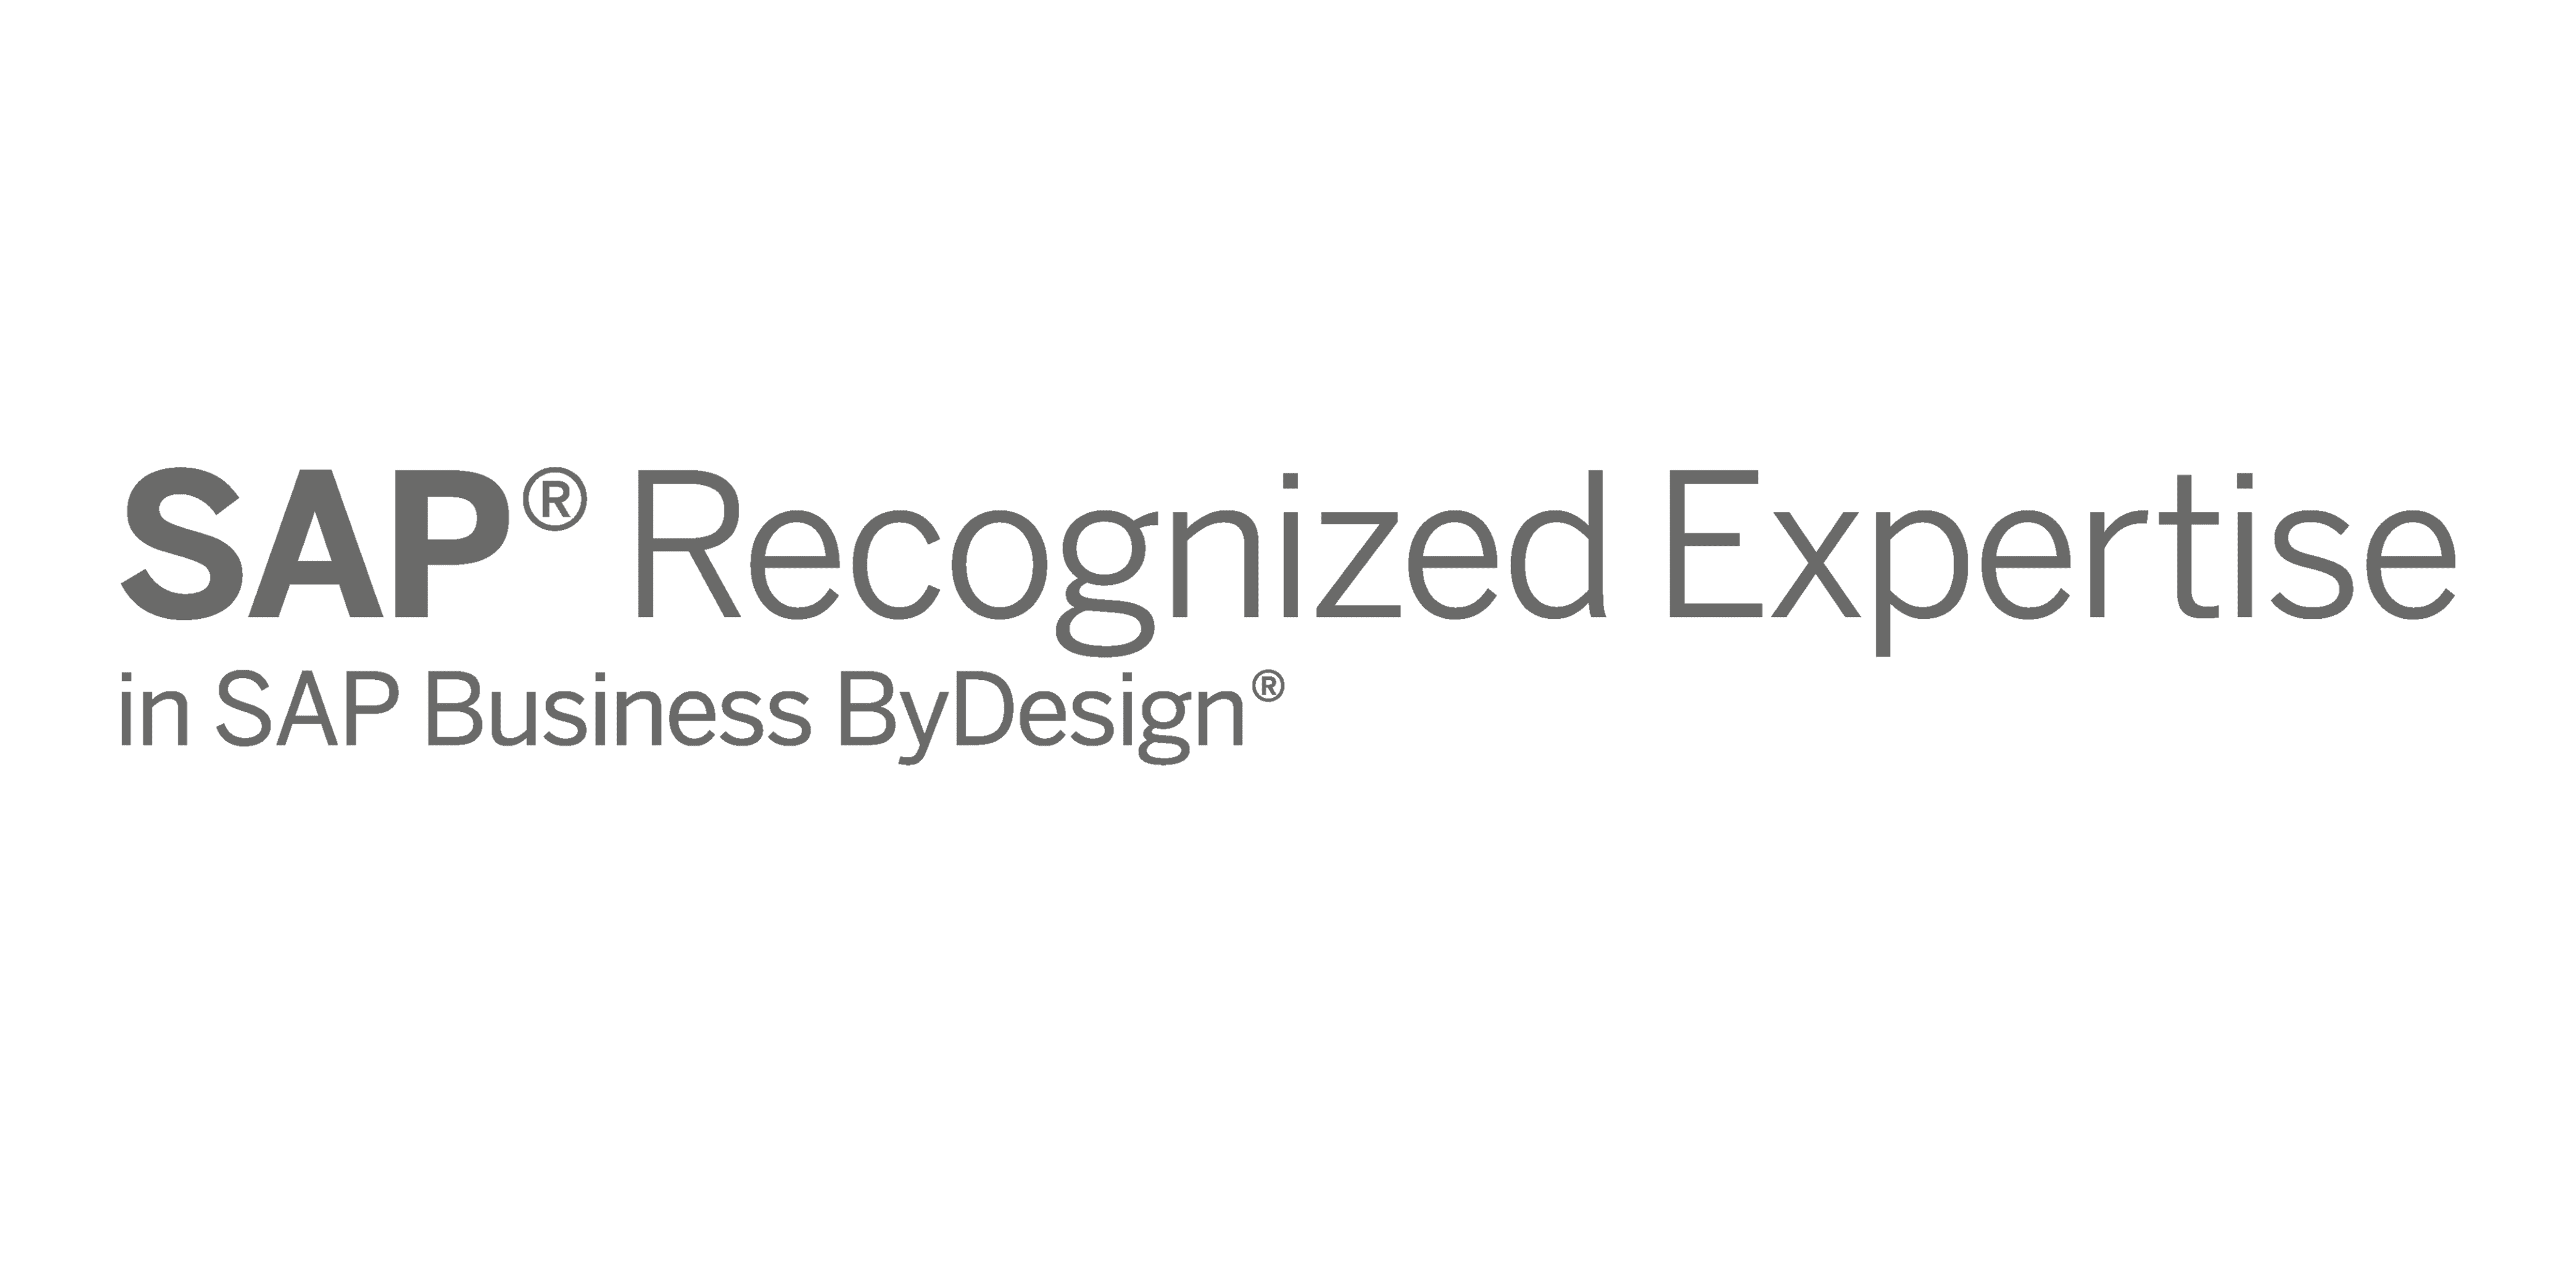 Logo SAP Recognized Expertise in SAP Business ByDesign